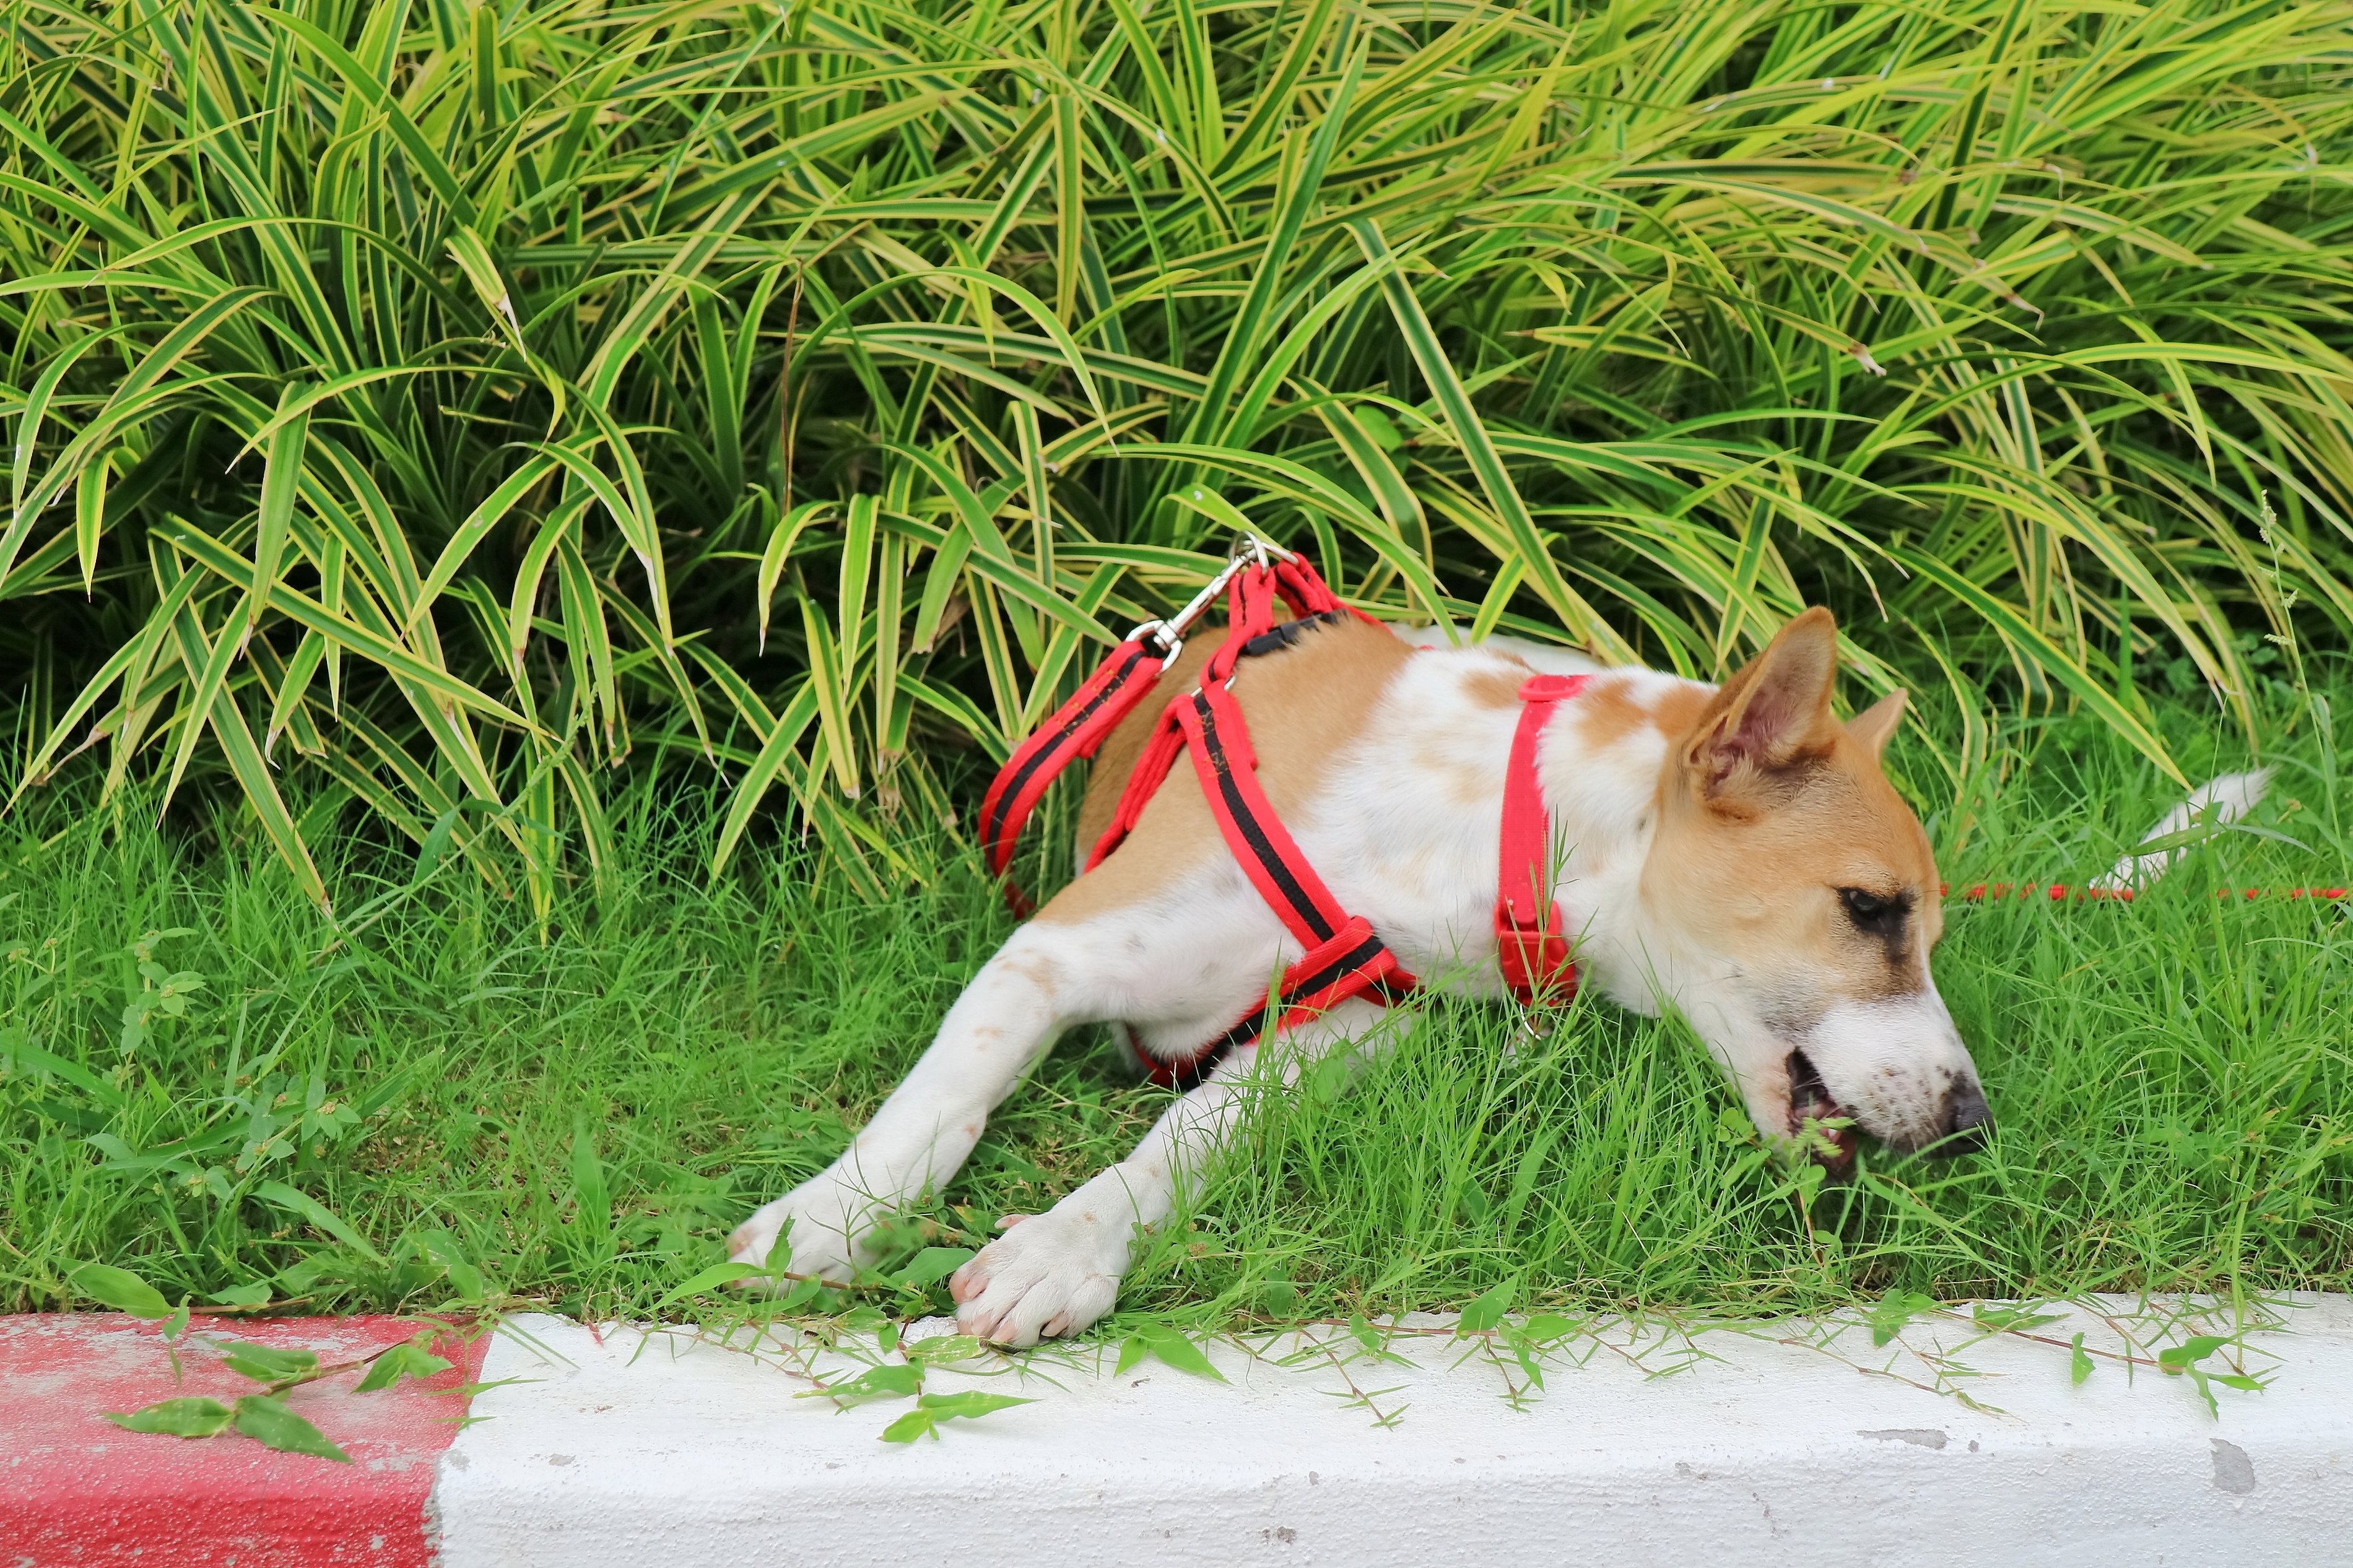 Why do Dogs Eat Grass?